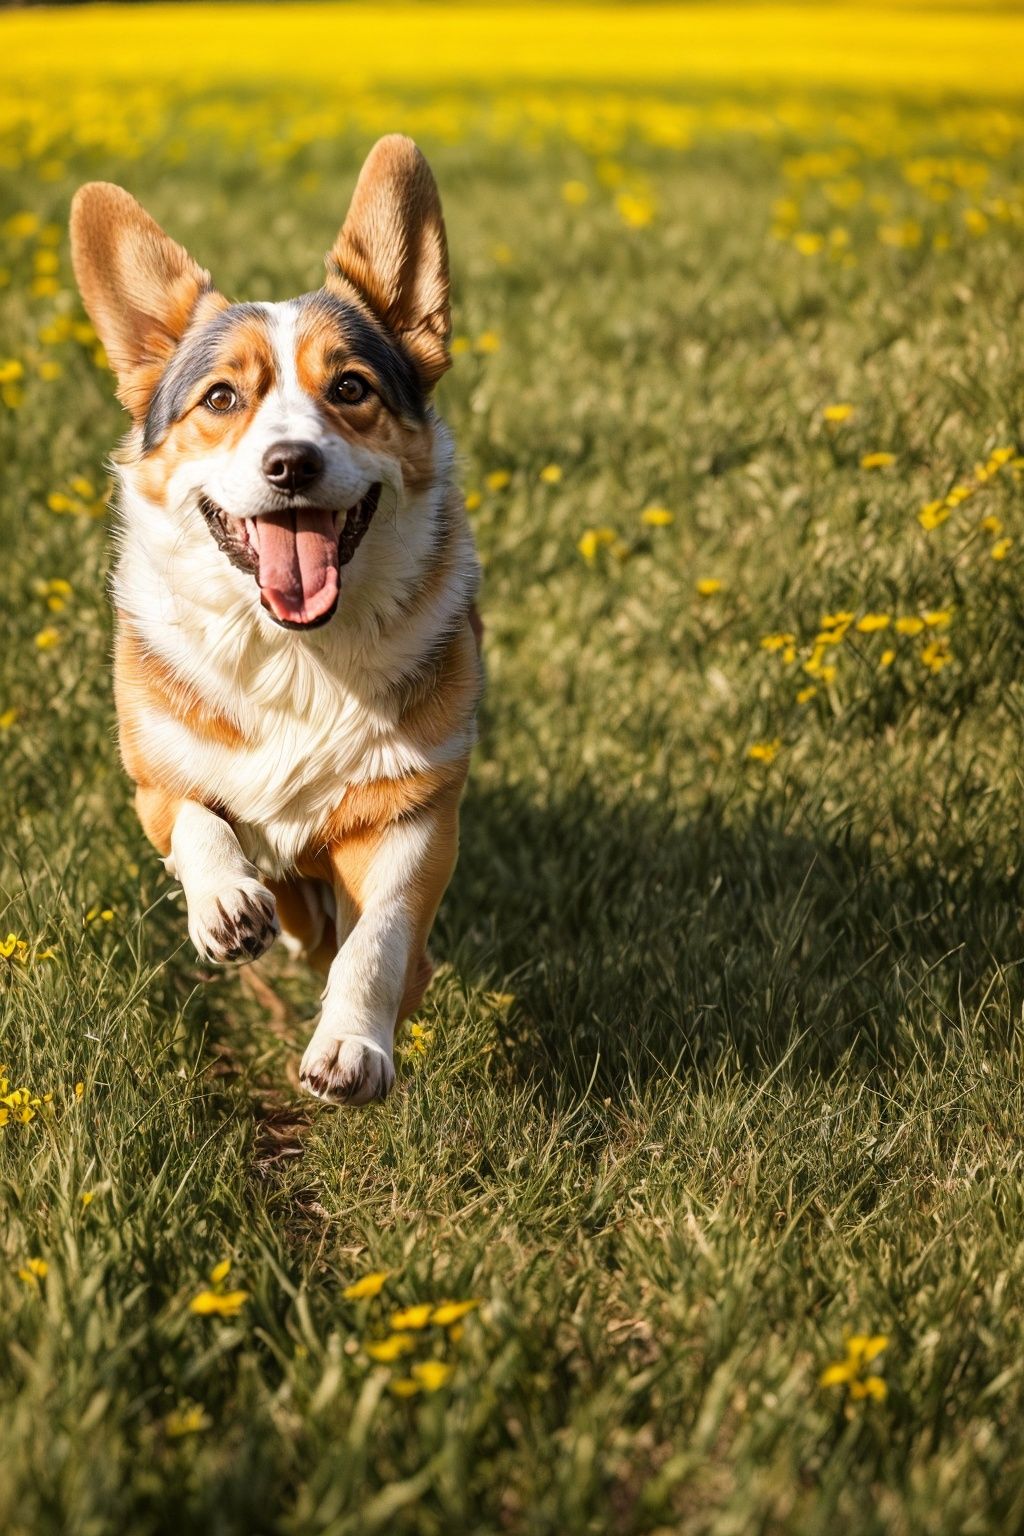 ((masterpiece)), ((best quality)), 8k, high detailed, ultra-detailed, pet photography, energetic corgi, 1corgi, (playful and vibrant), (lush green meadow), (bounding across the field), (floppy ears in motion), (tongue lolling with excitement), (dynamic and joyful), capturing the spirited and delightful essence of a corgi running freely in a sunlit meadow., <lora:coloricher:1>